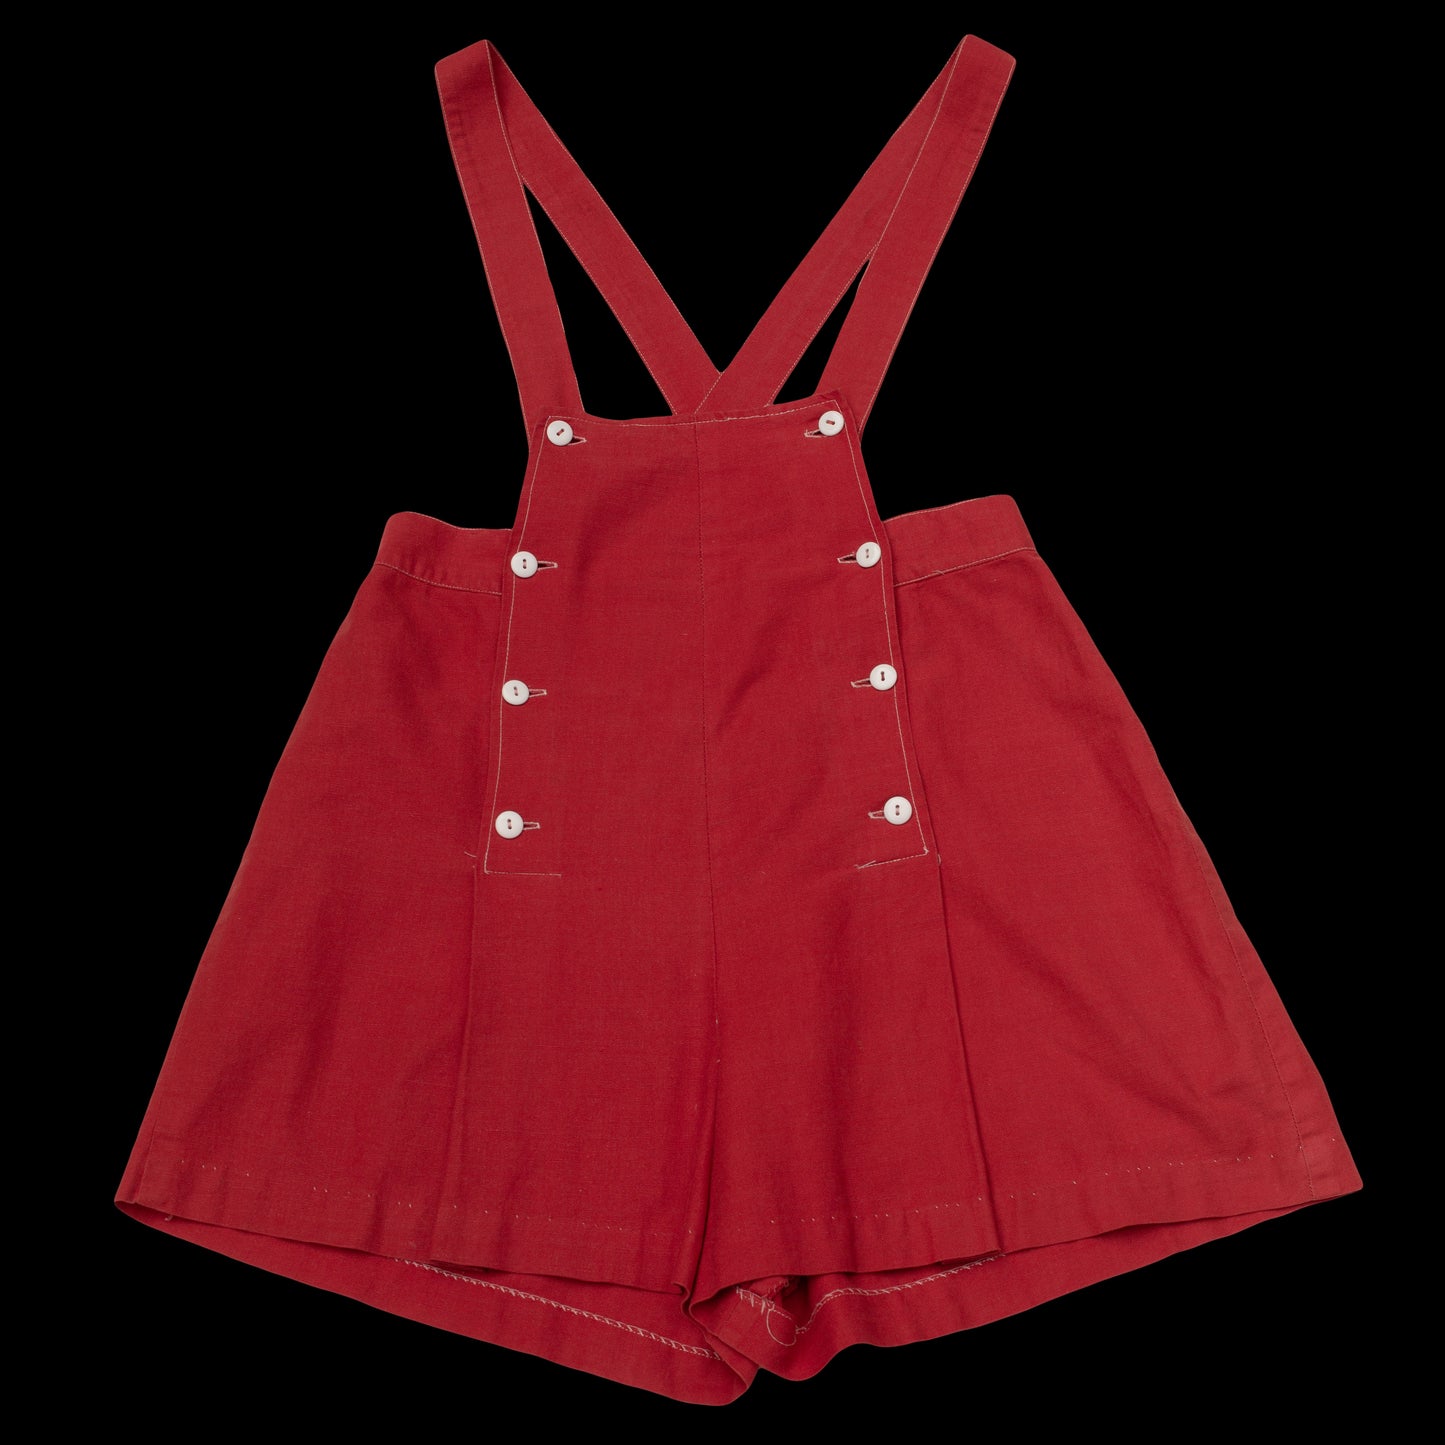 Vintage 1940s Red Cotton Overall Shorts Romper